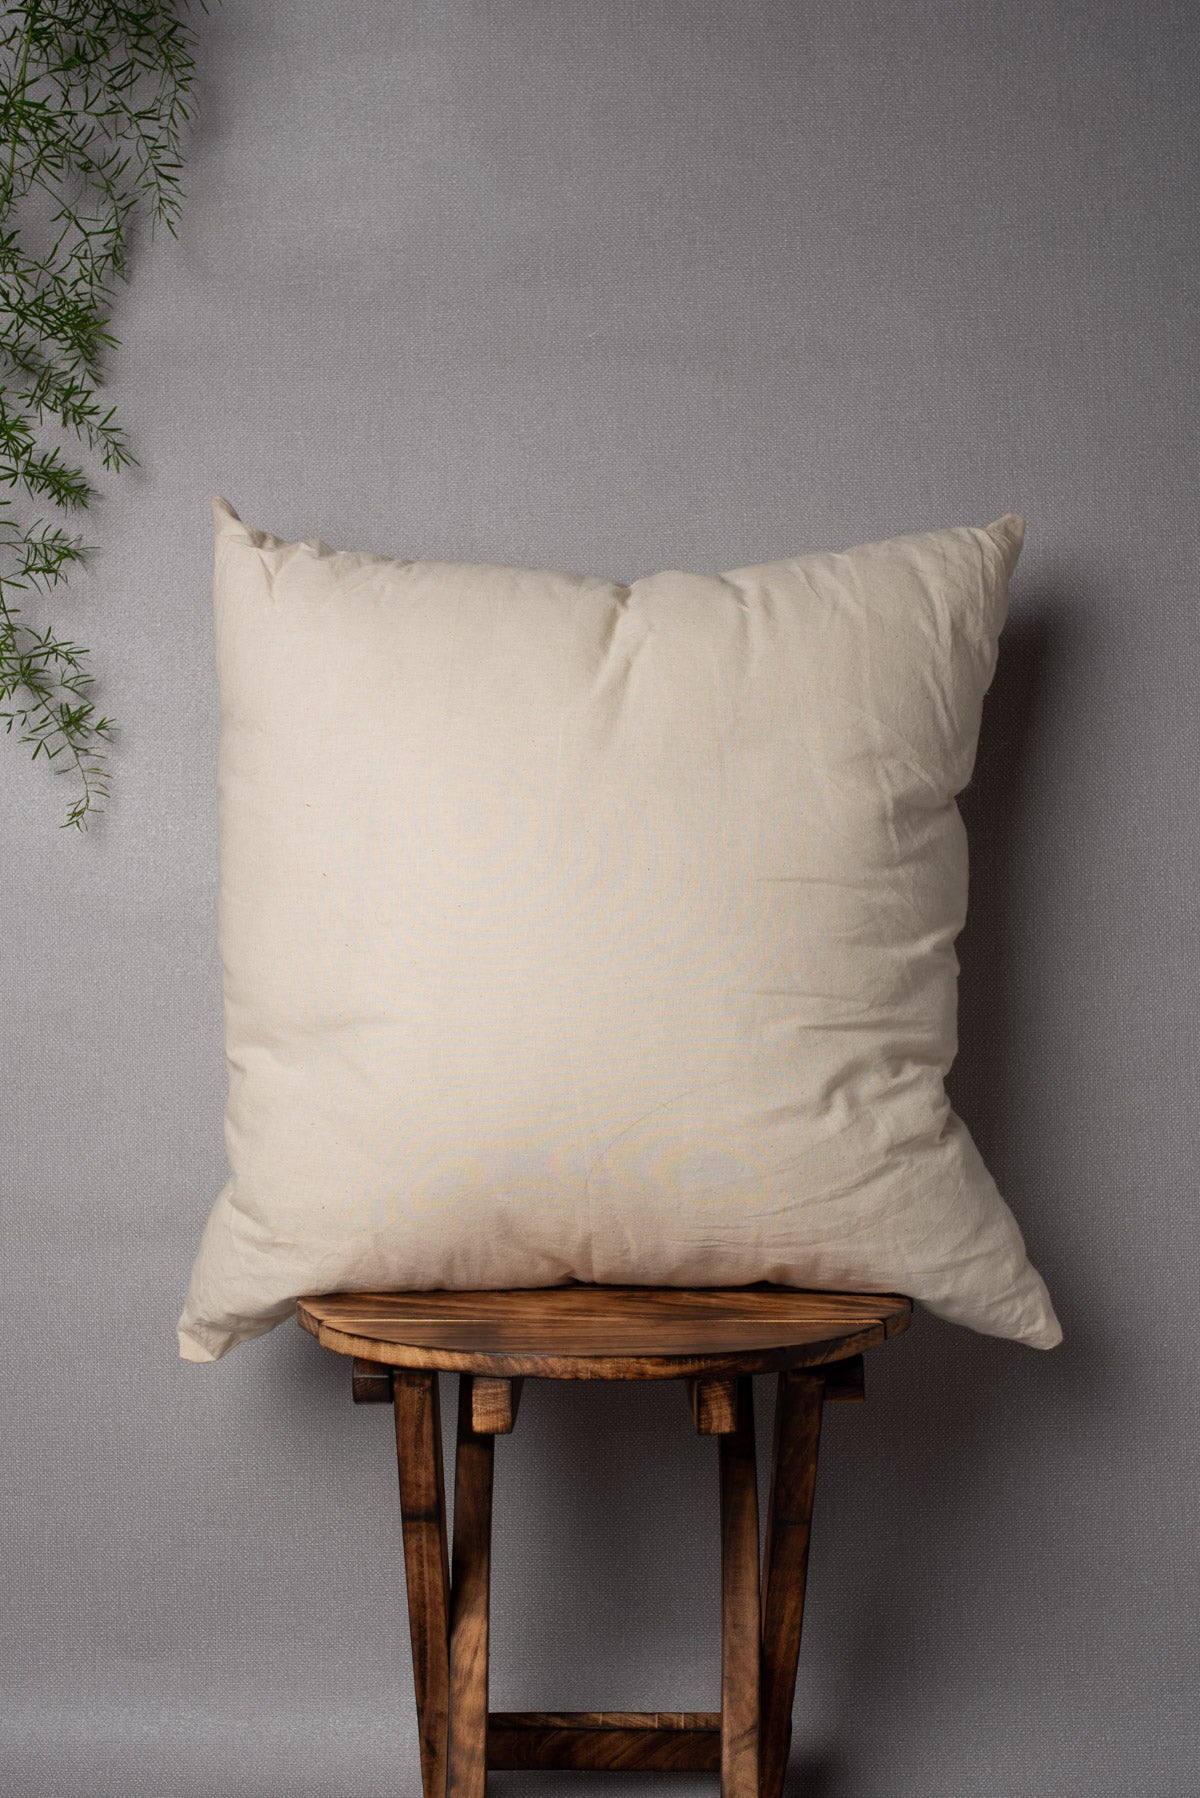 Cushion Filler with Man Made Fiber Filling and Cotton Cover - 20"